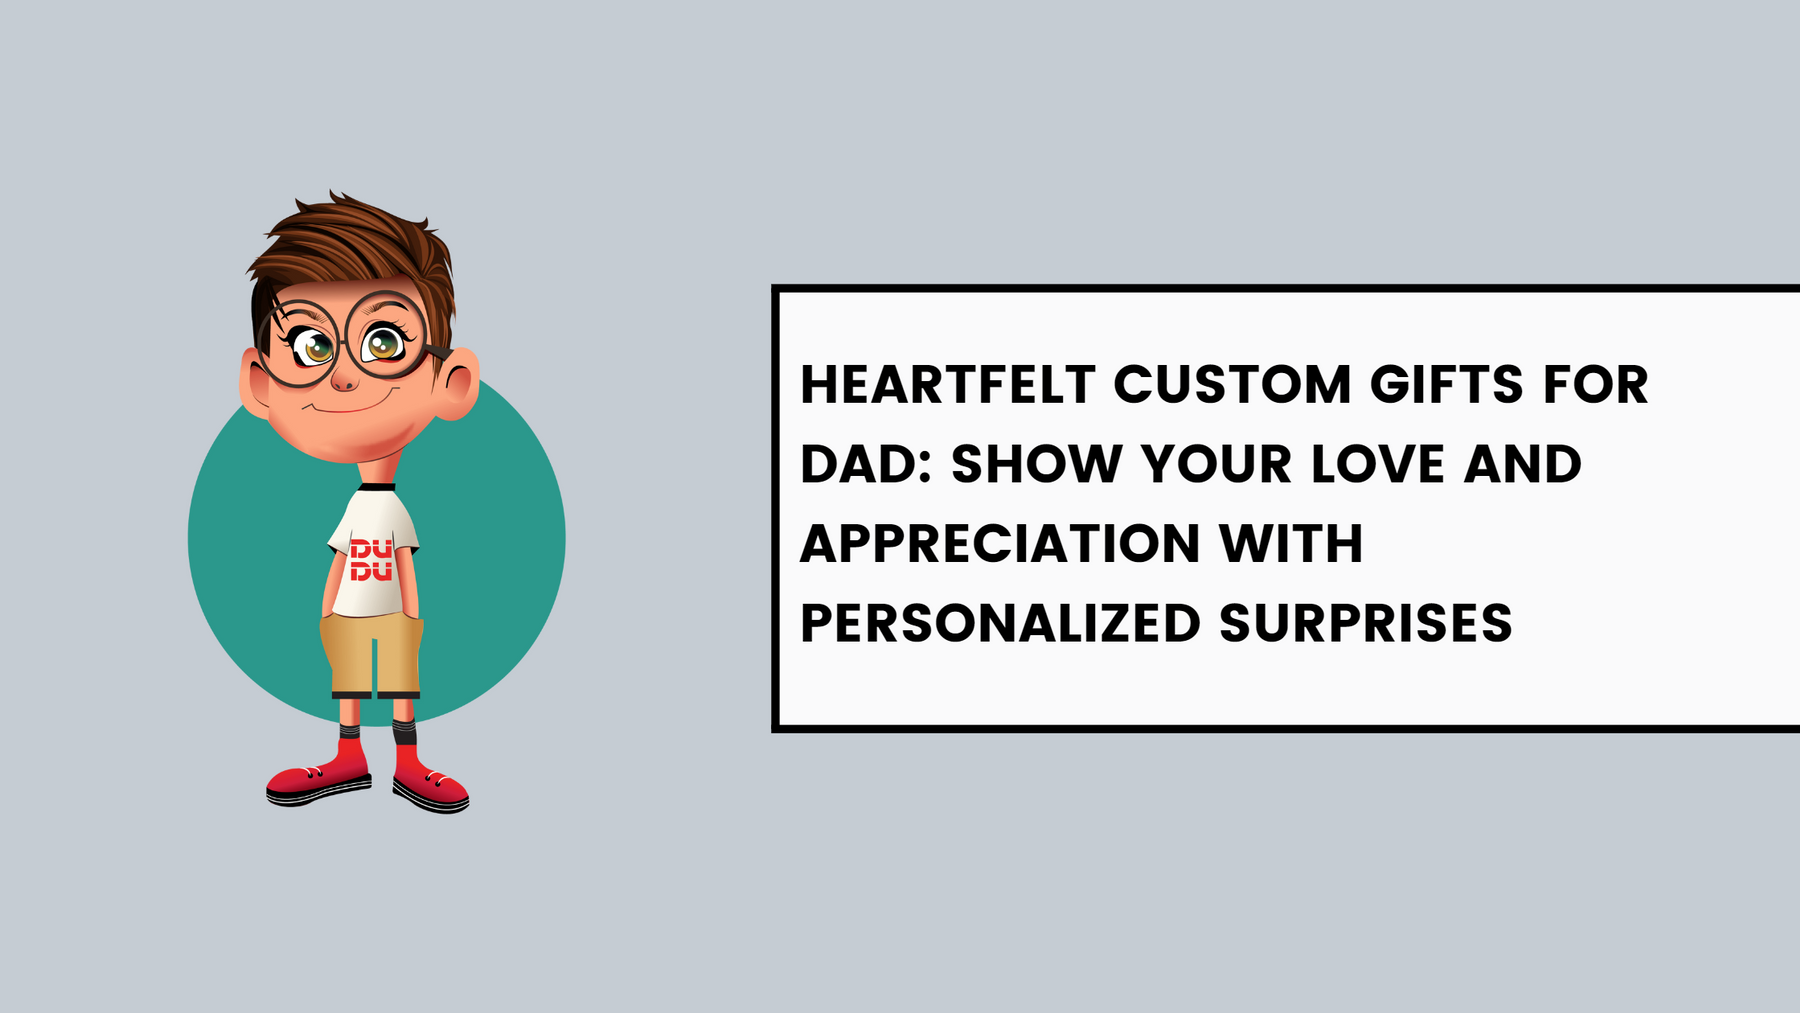 Heartfelt Custom Gifts for Dad: Show Your Love and Appreciation with Personalized Surprises